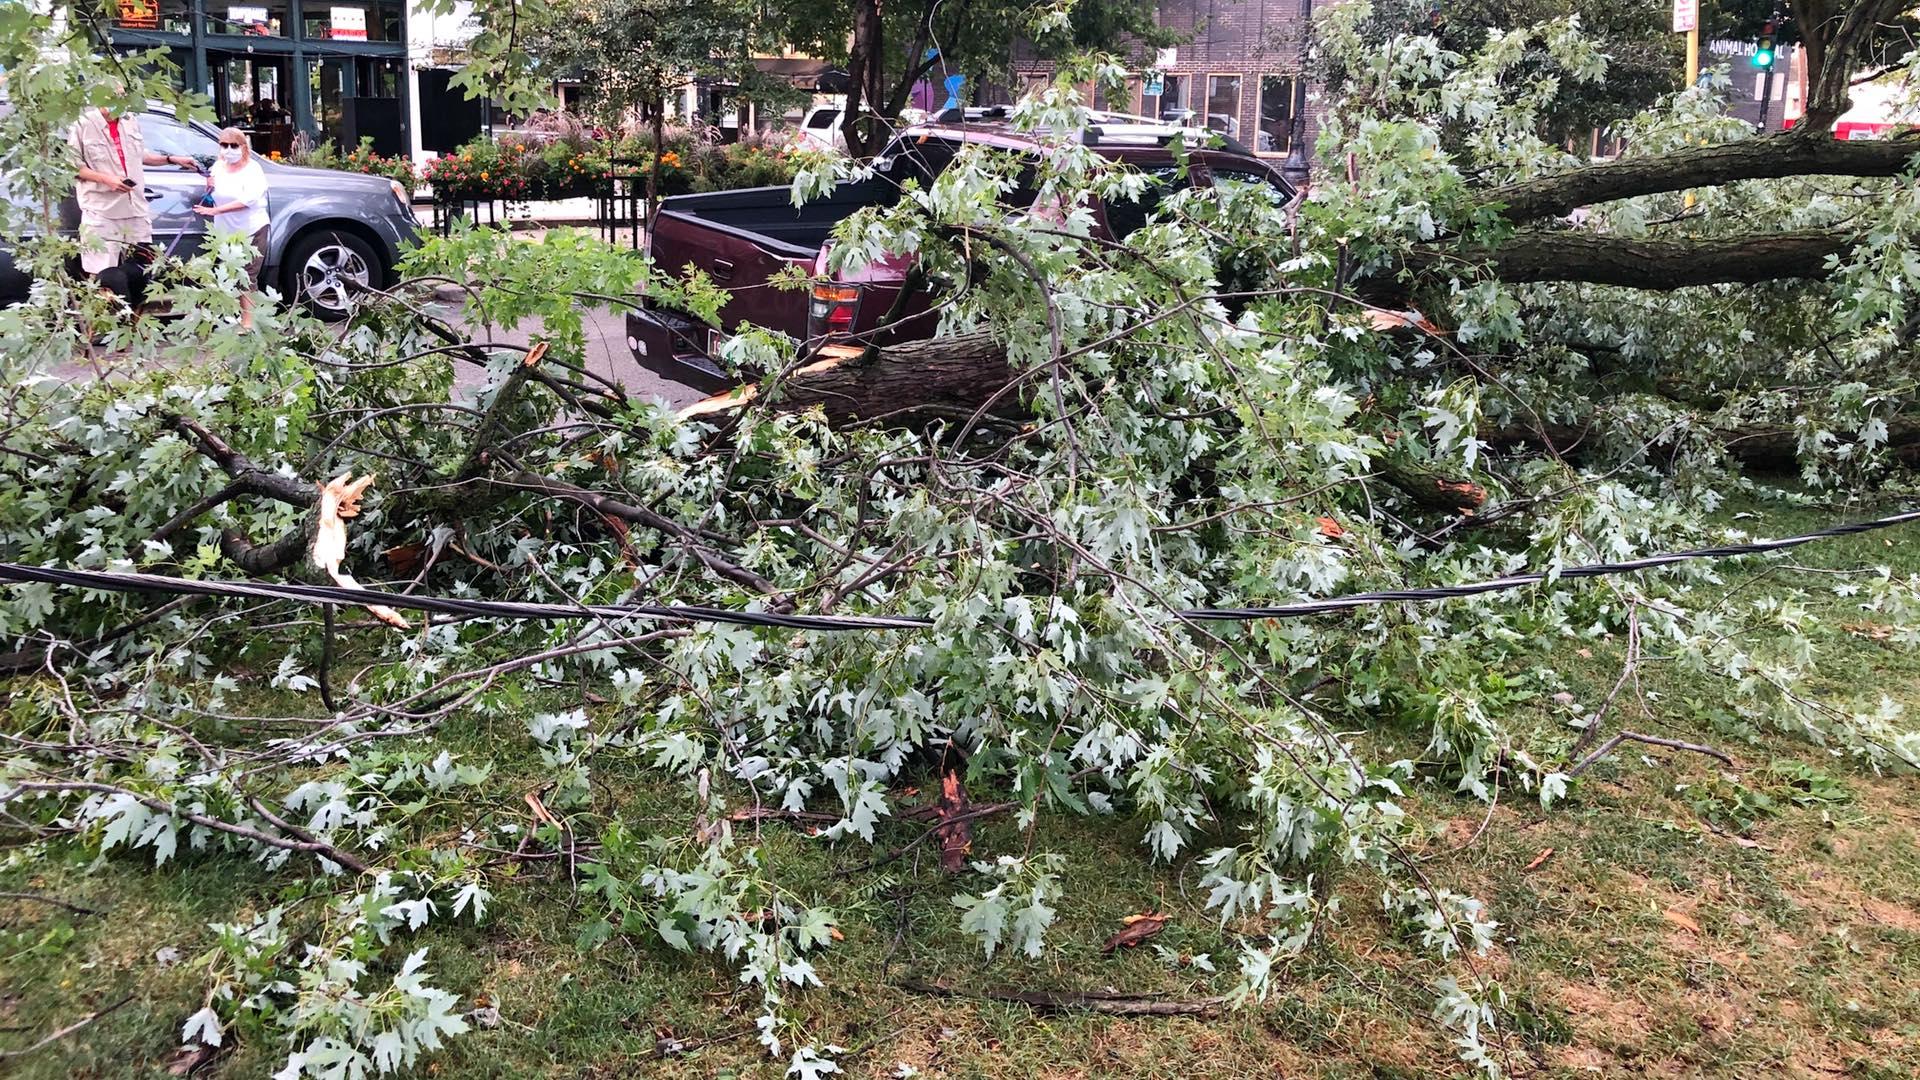 Nearly 12,000 trees were lost during the powerful derecho storm in Chicago on Aug. 10, 2020. (Patty Wetli / WTTW News)